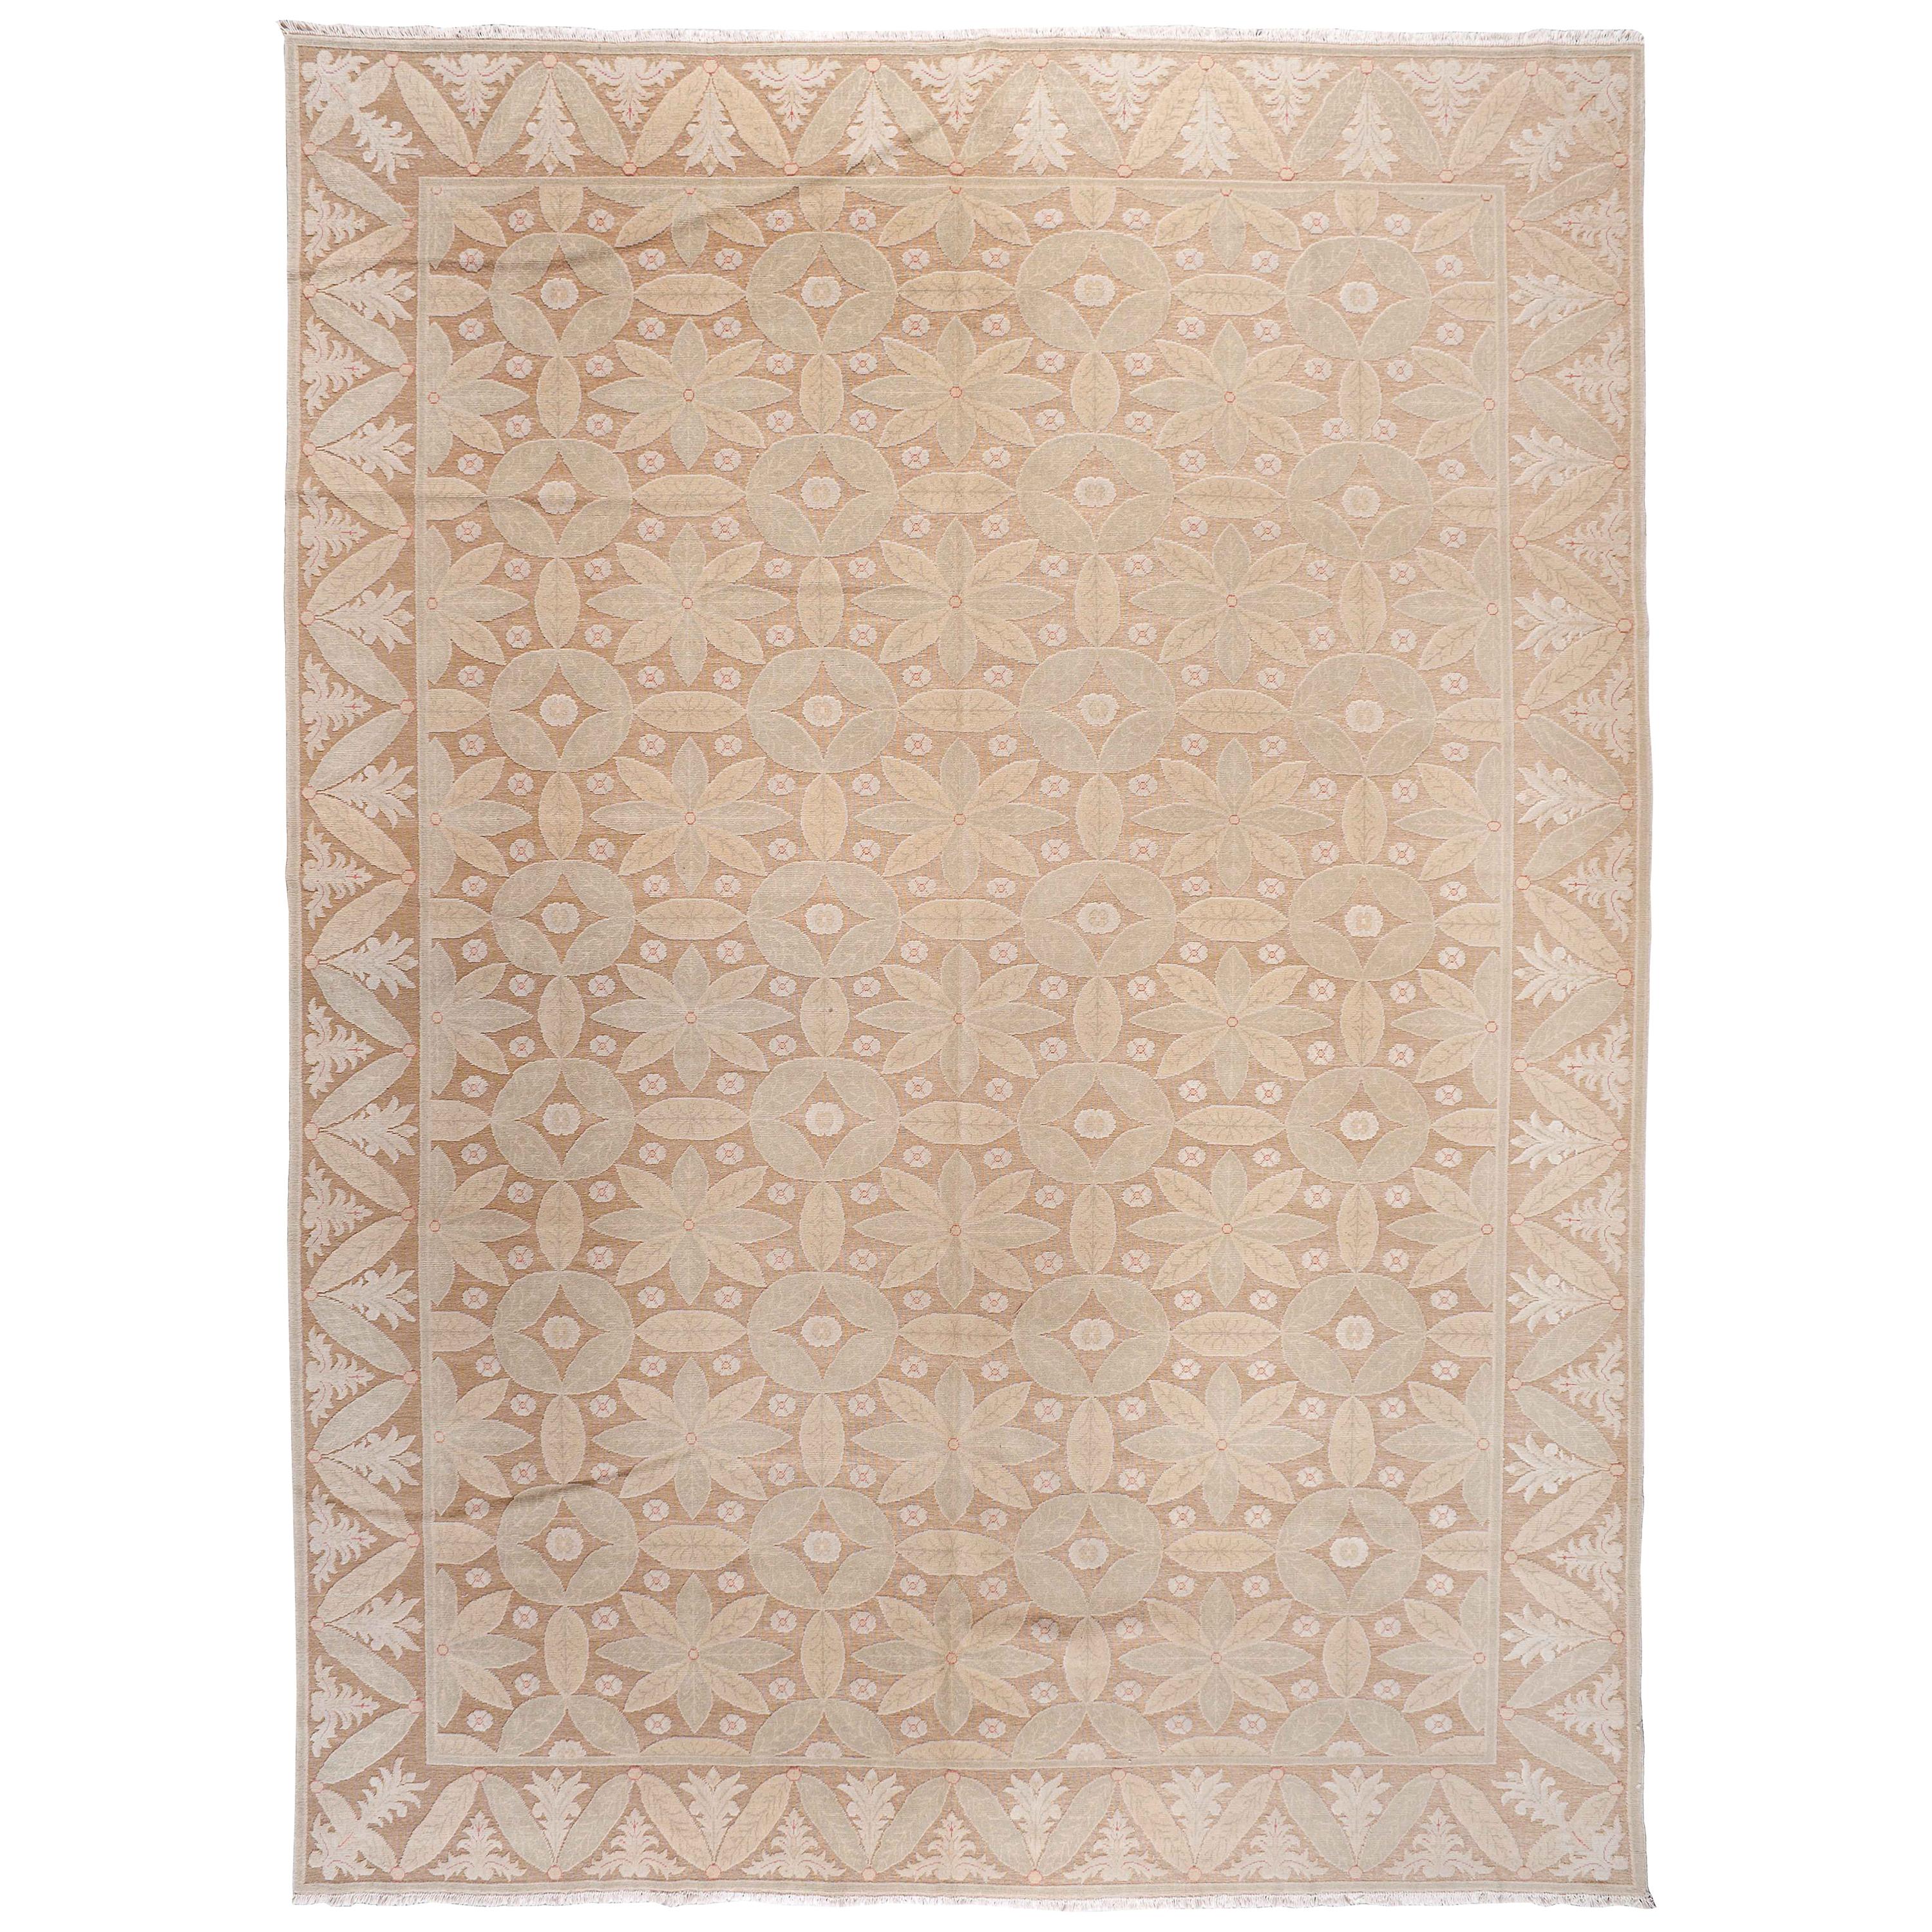 Leaves and Blossoms Tan Rug